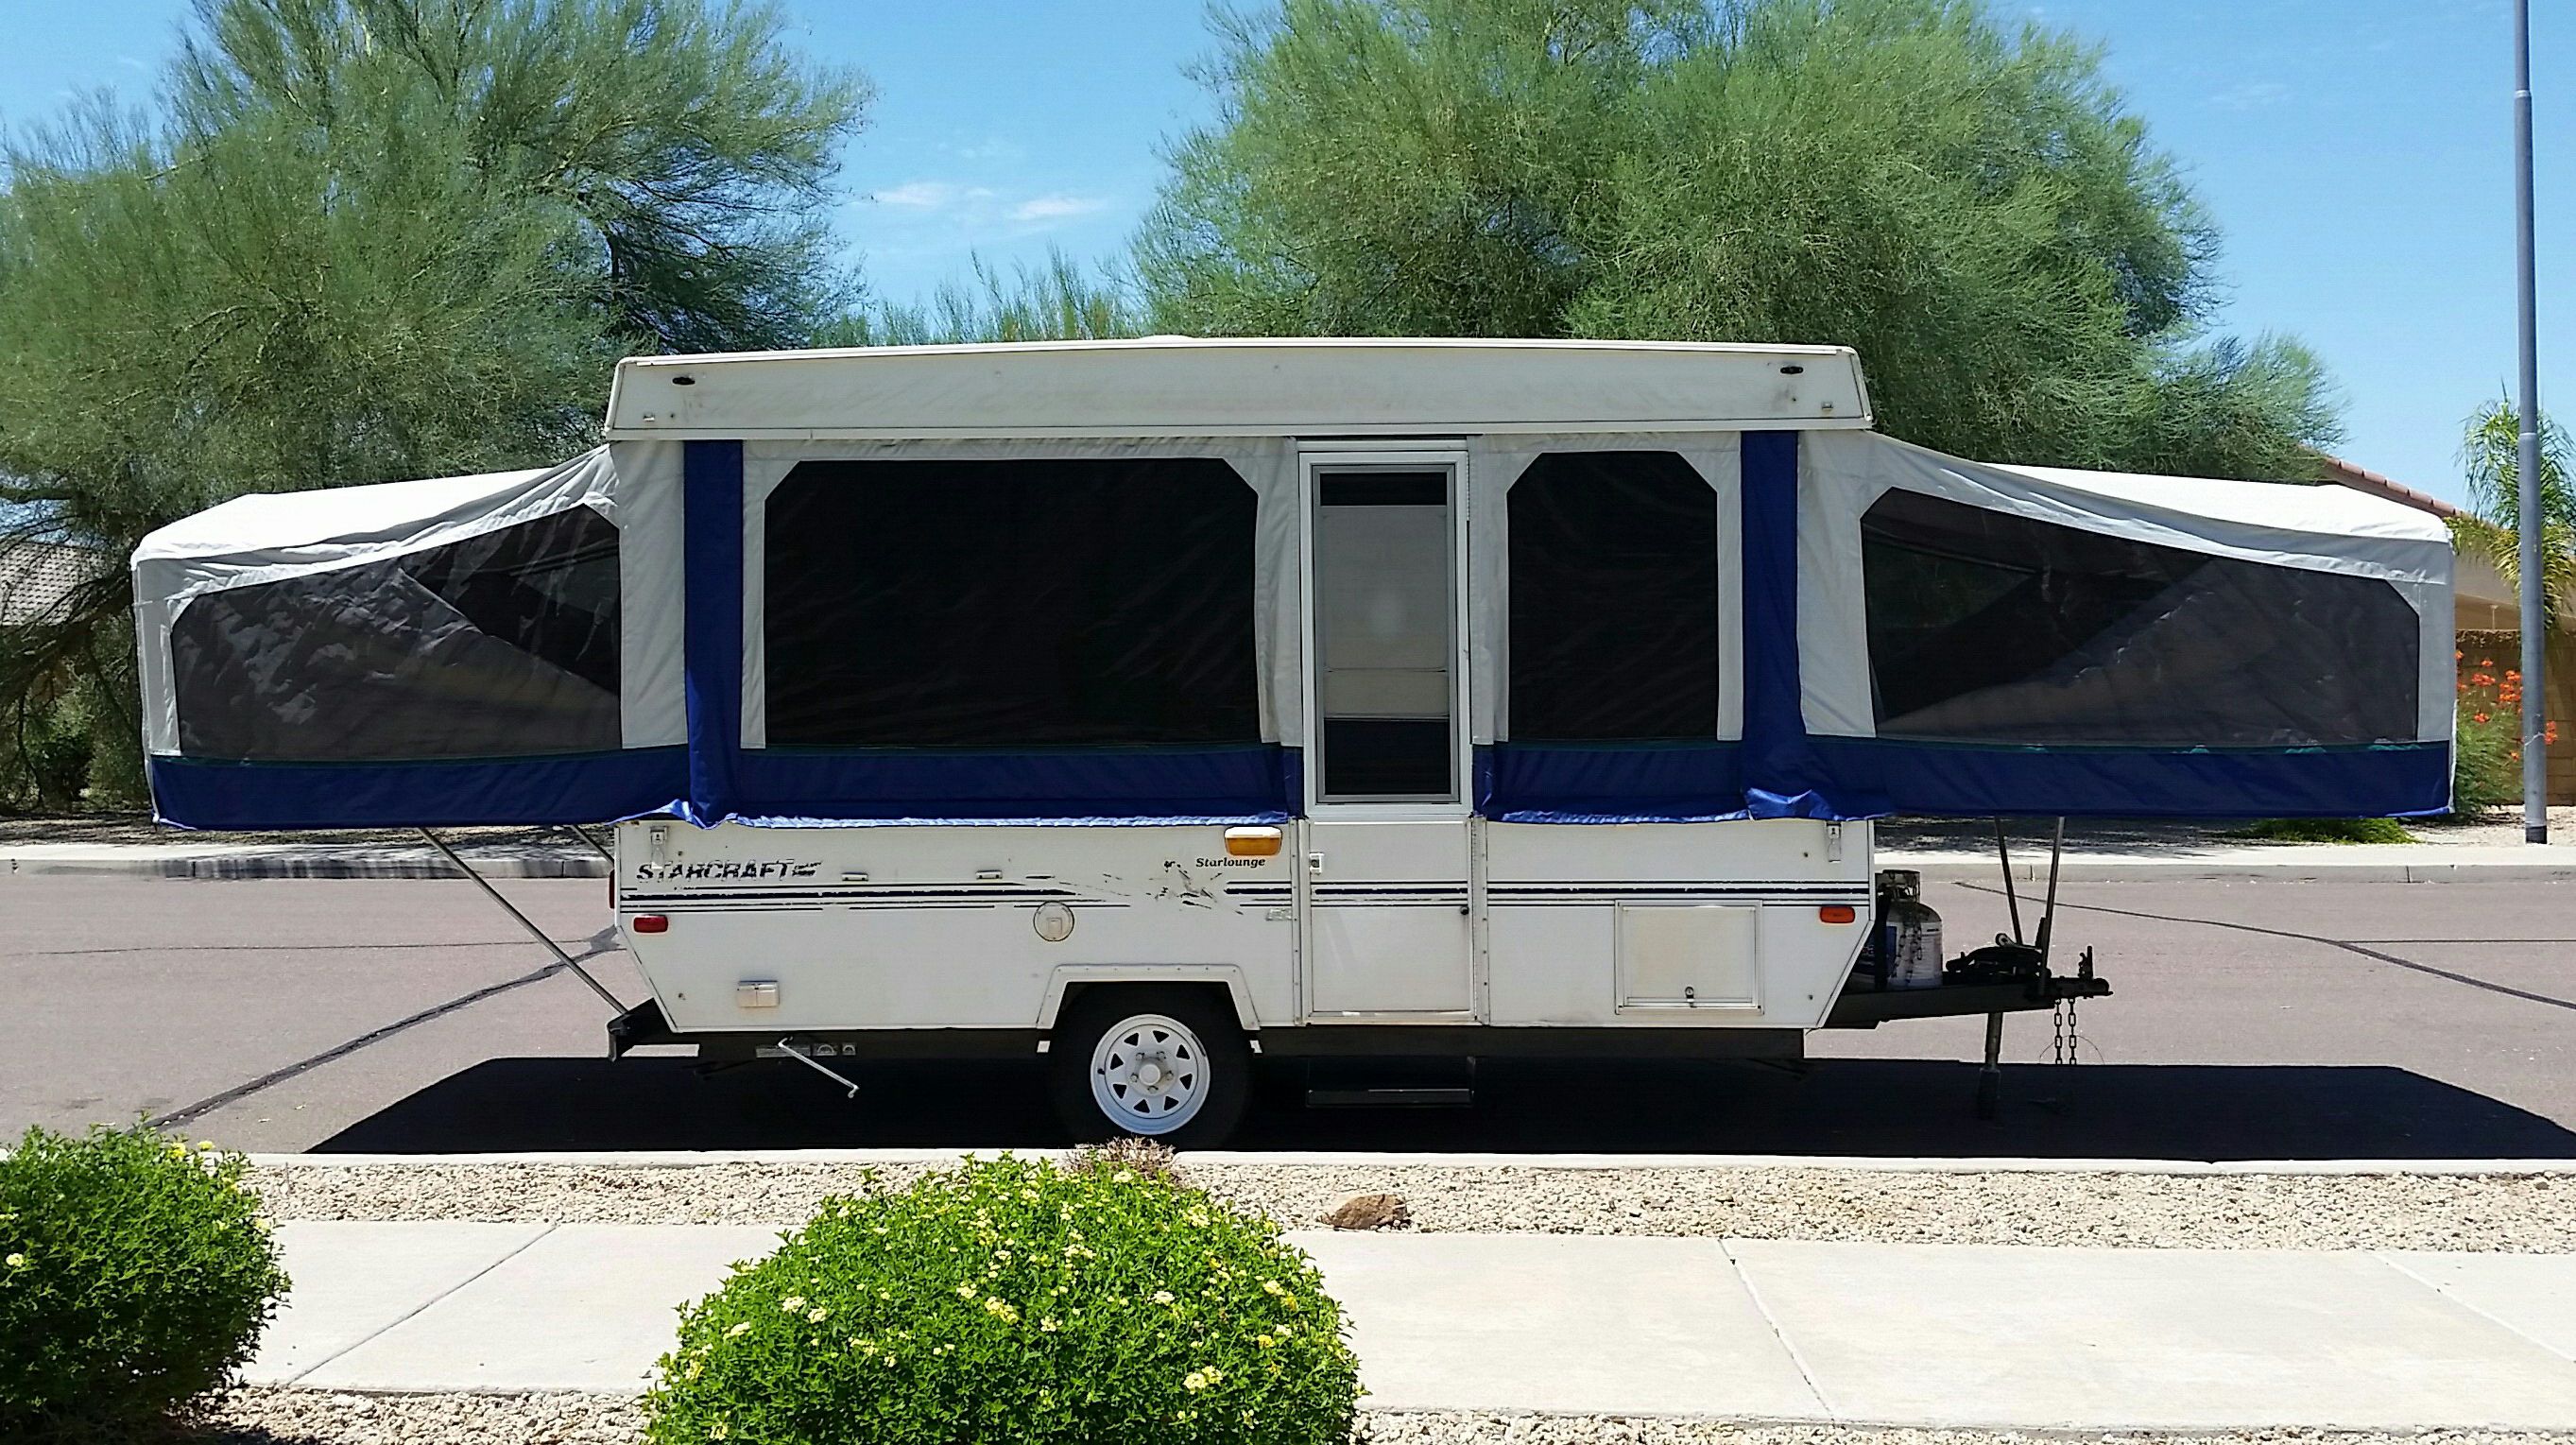 RV Roof Coating Special for Sale in Peoria, AZ - OfferUp